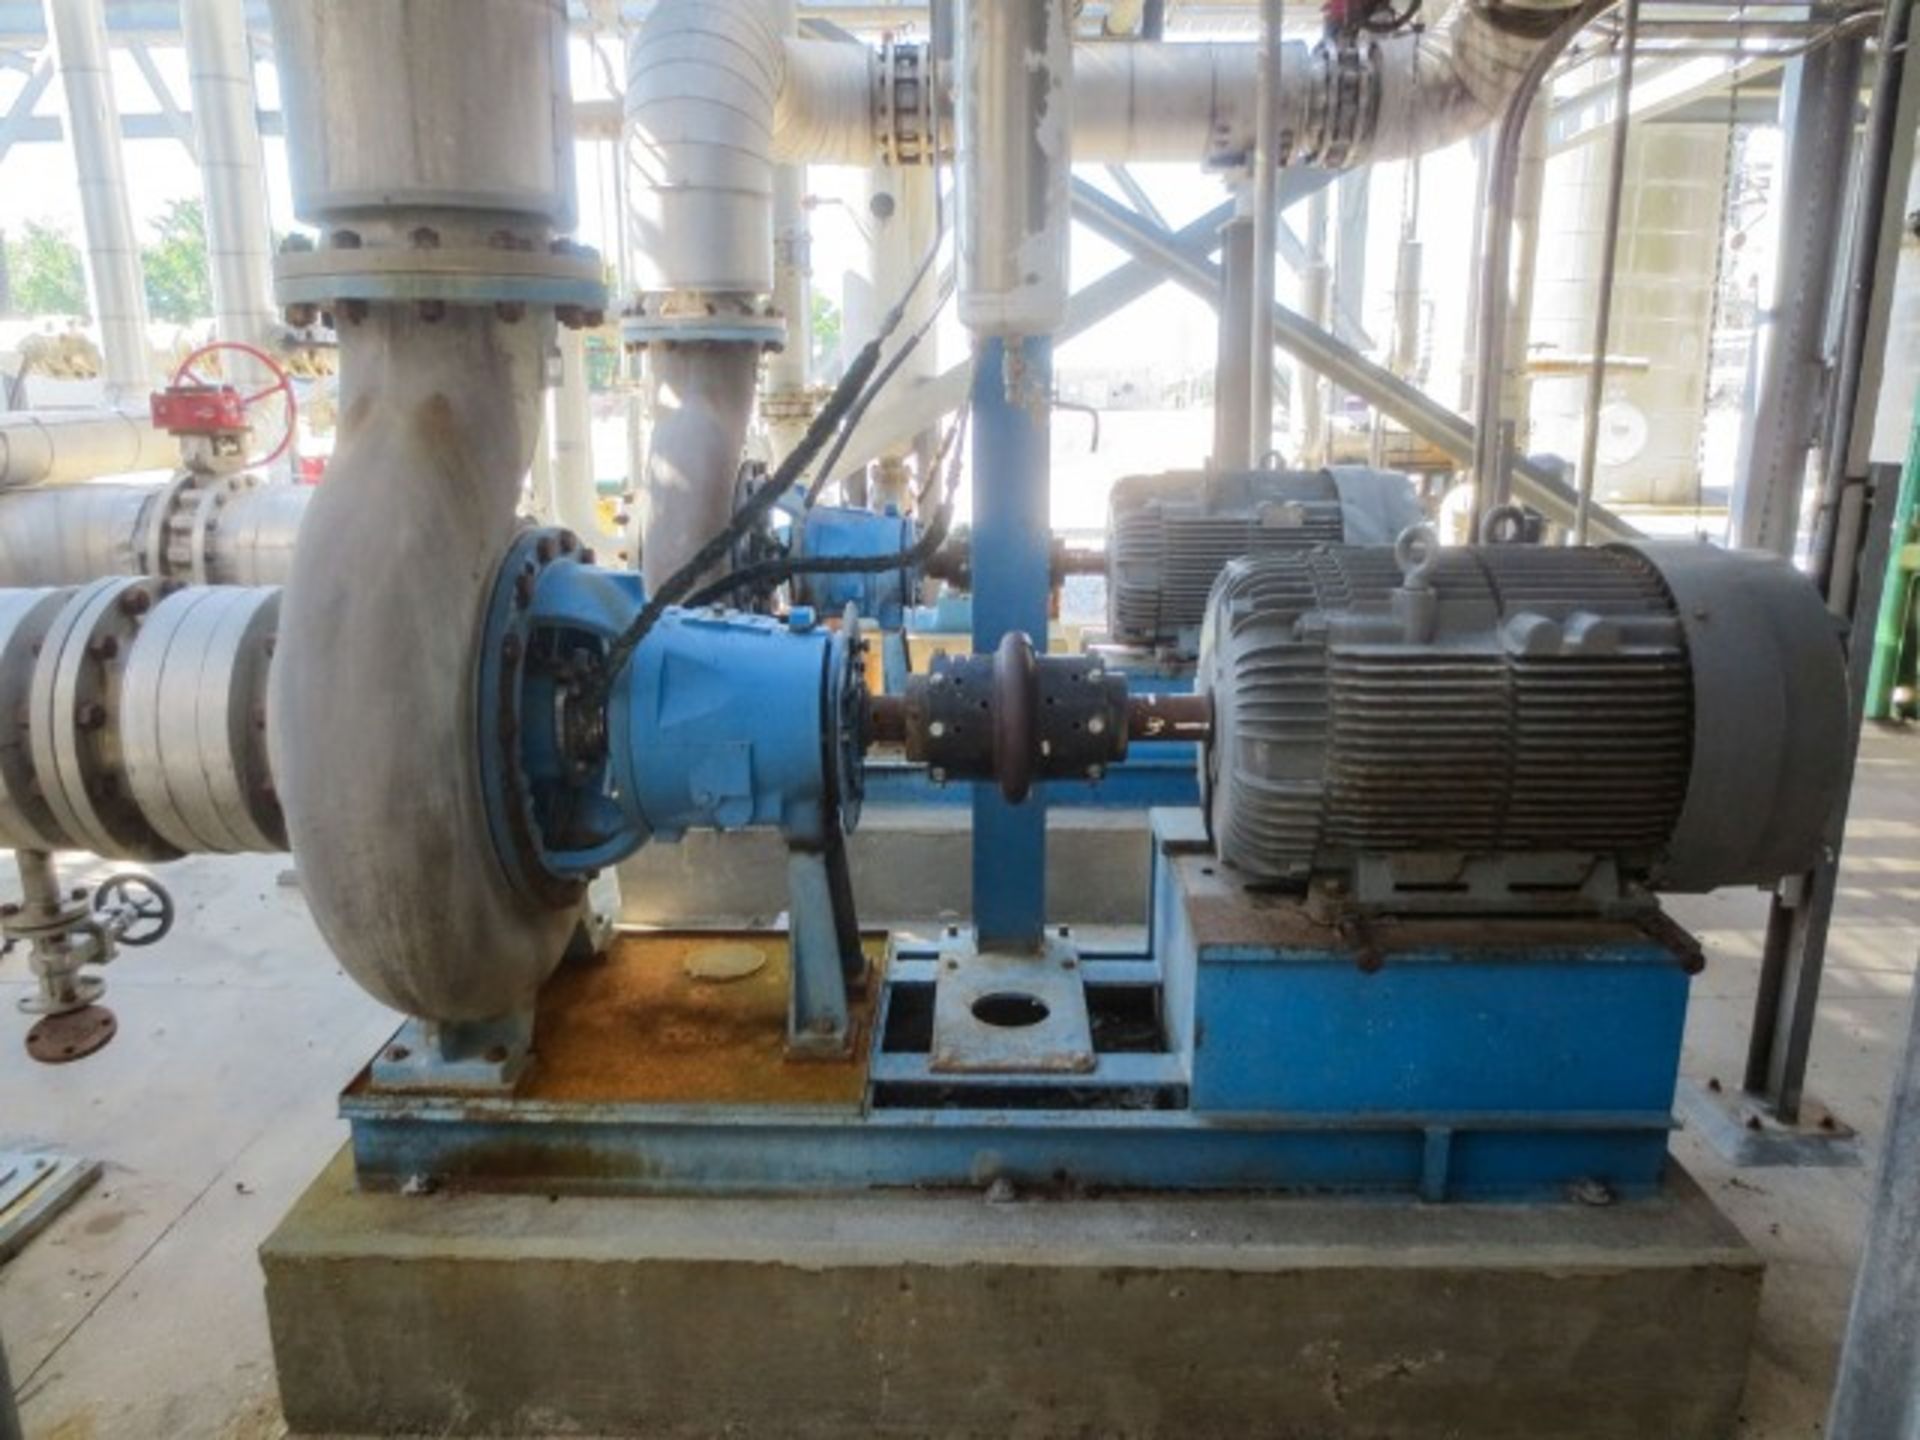 Goulds centrifugal pump, model 3175L. Size 14X14-22H with impeller dia Rigging/Loading Fee: $1000